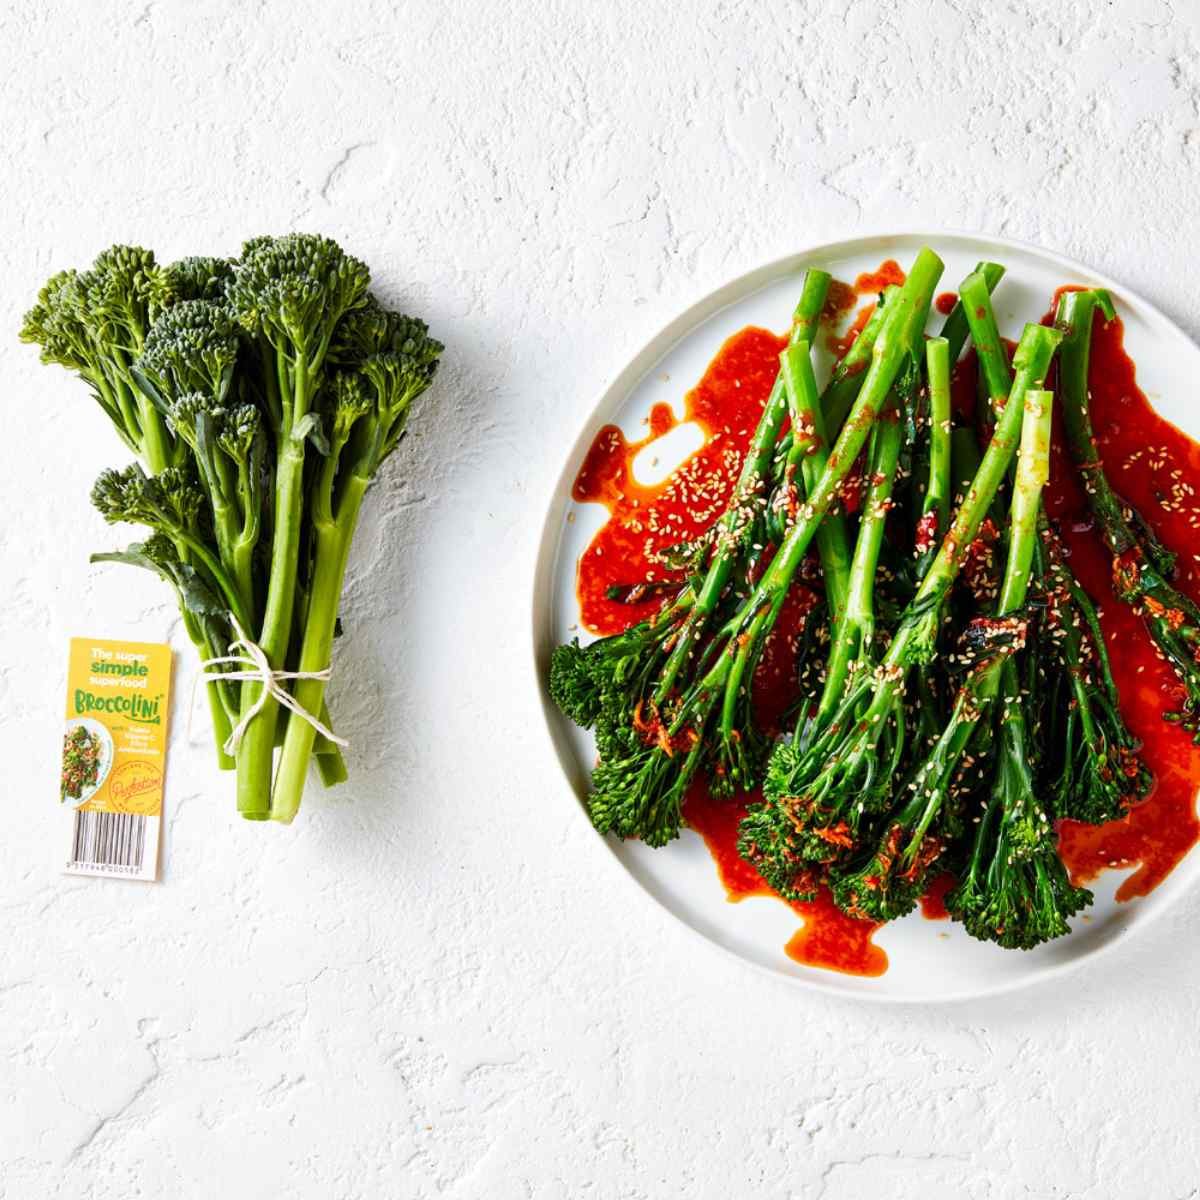 Steamed broccolini with gochujang dressing in a white plate, more loose broccolini on the left.